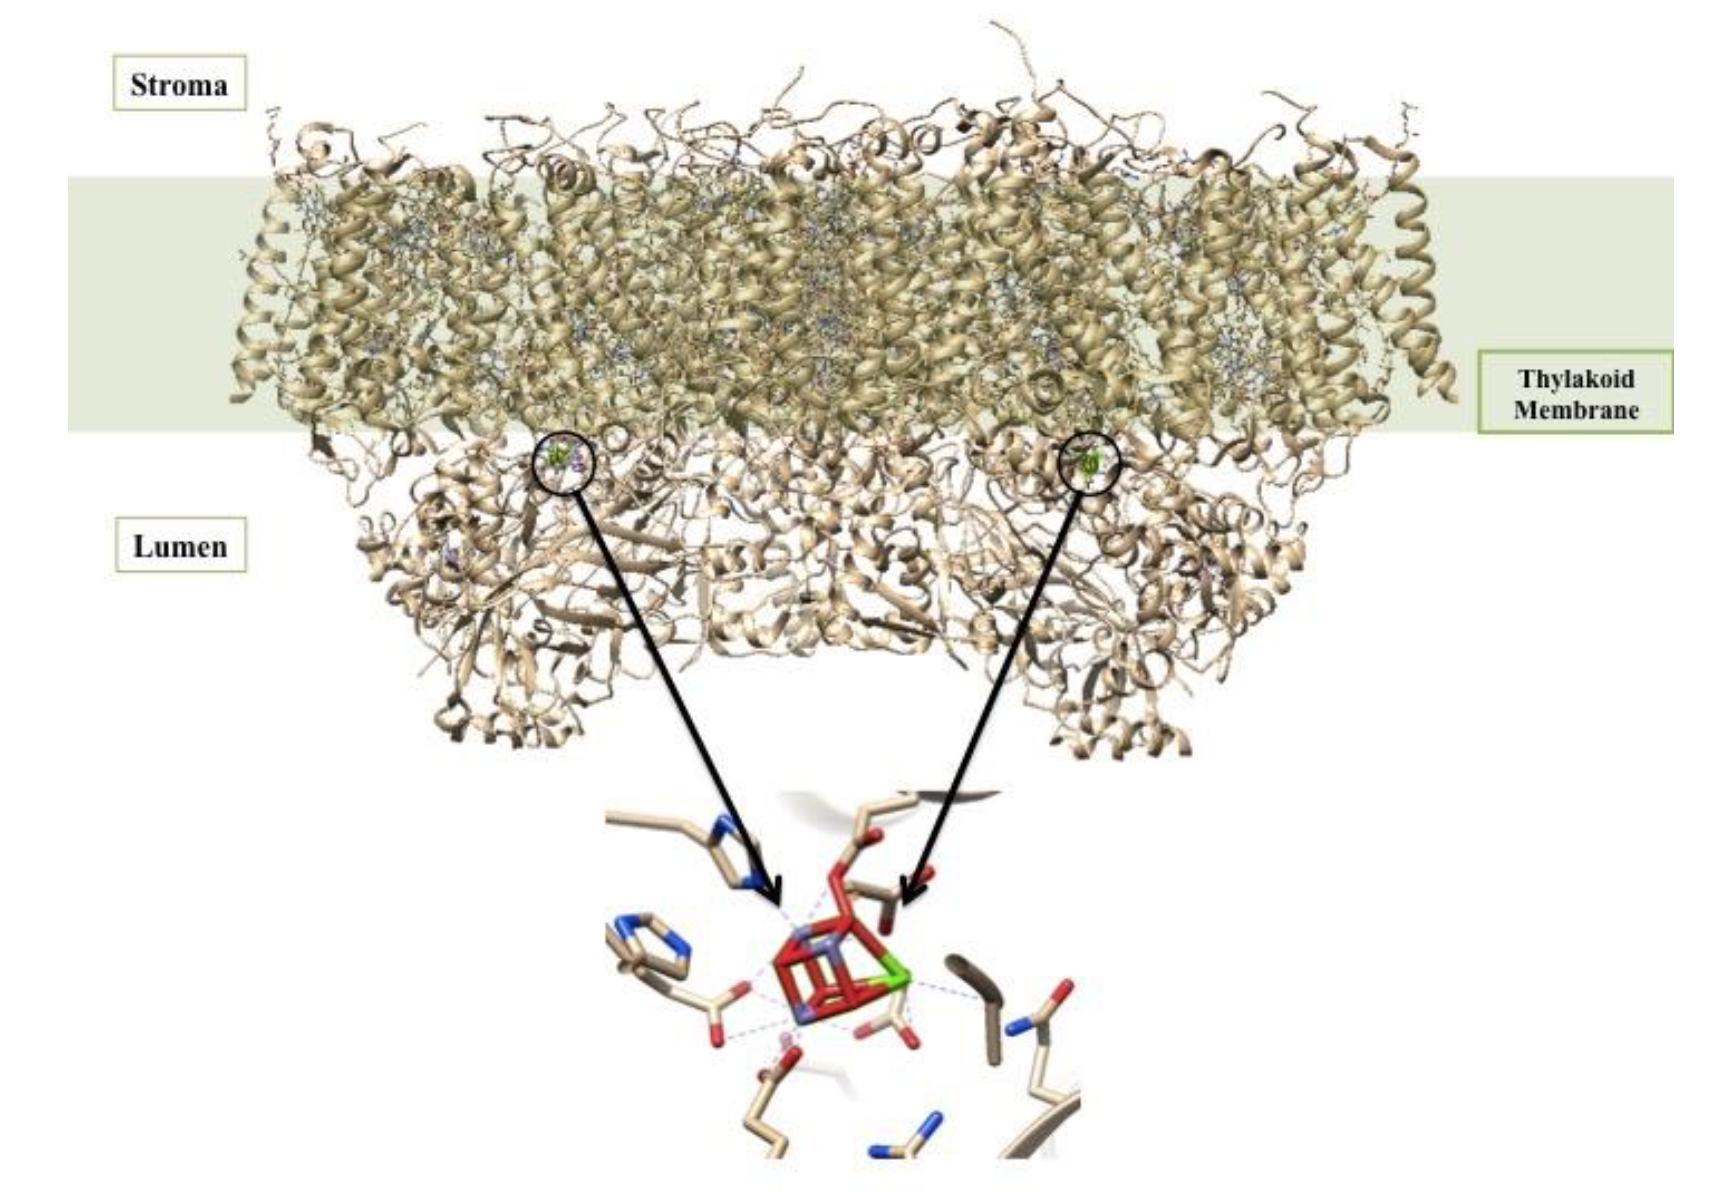 Photosystem II with emphasis on the oxygen evolving centers